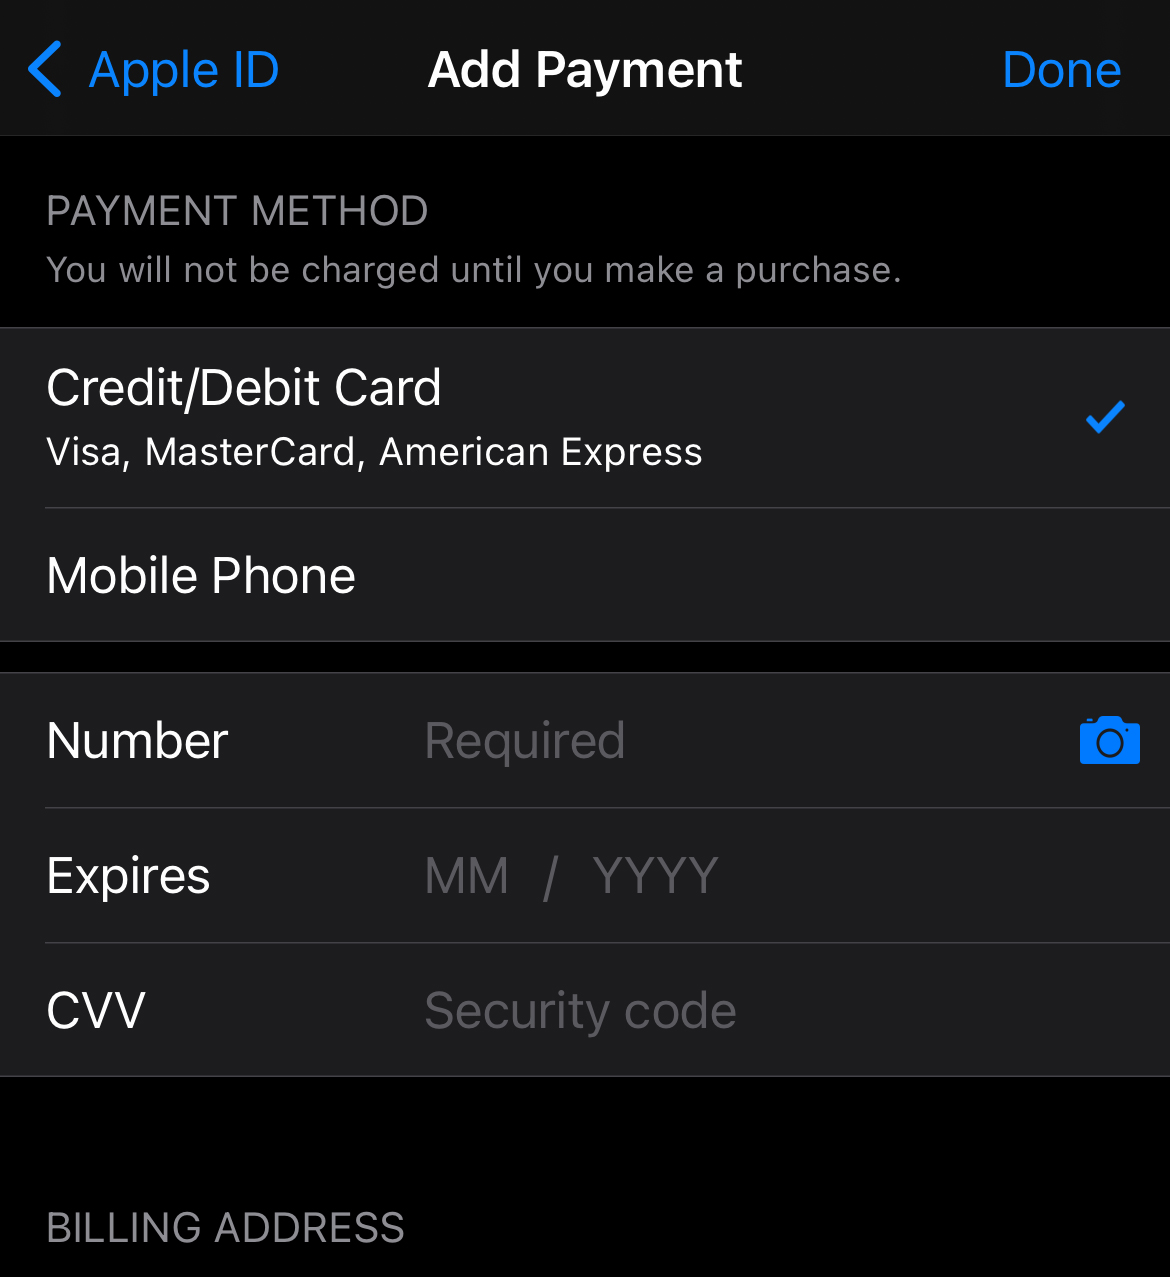 Add Payment